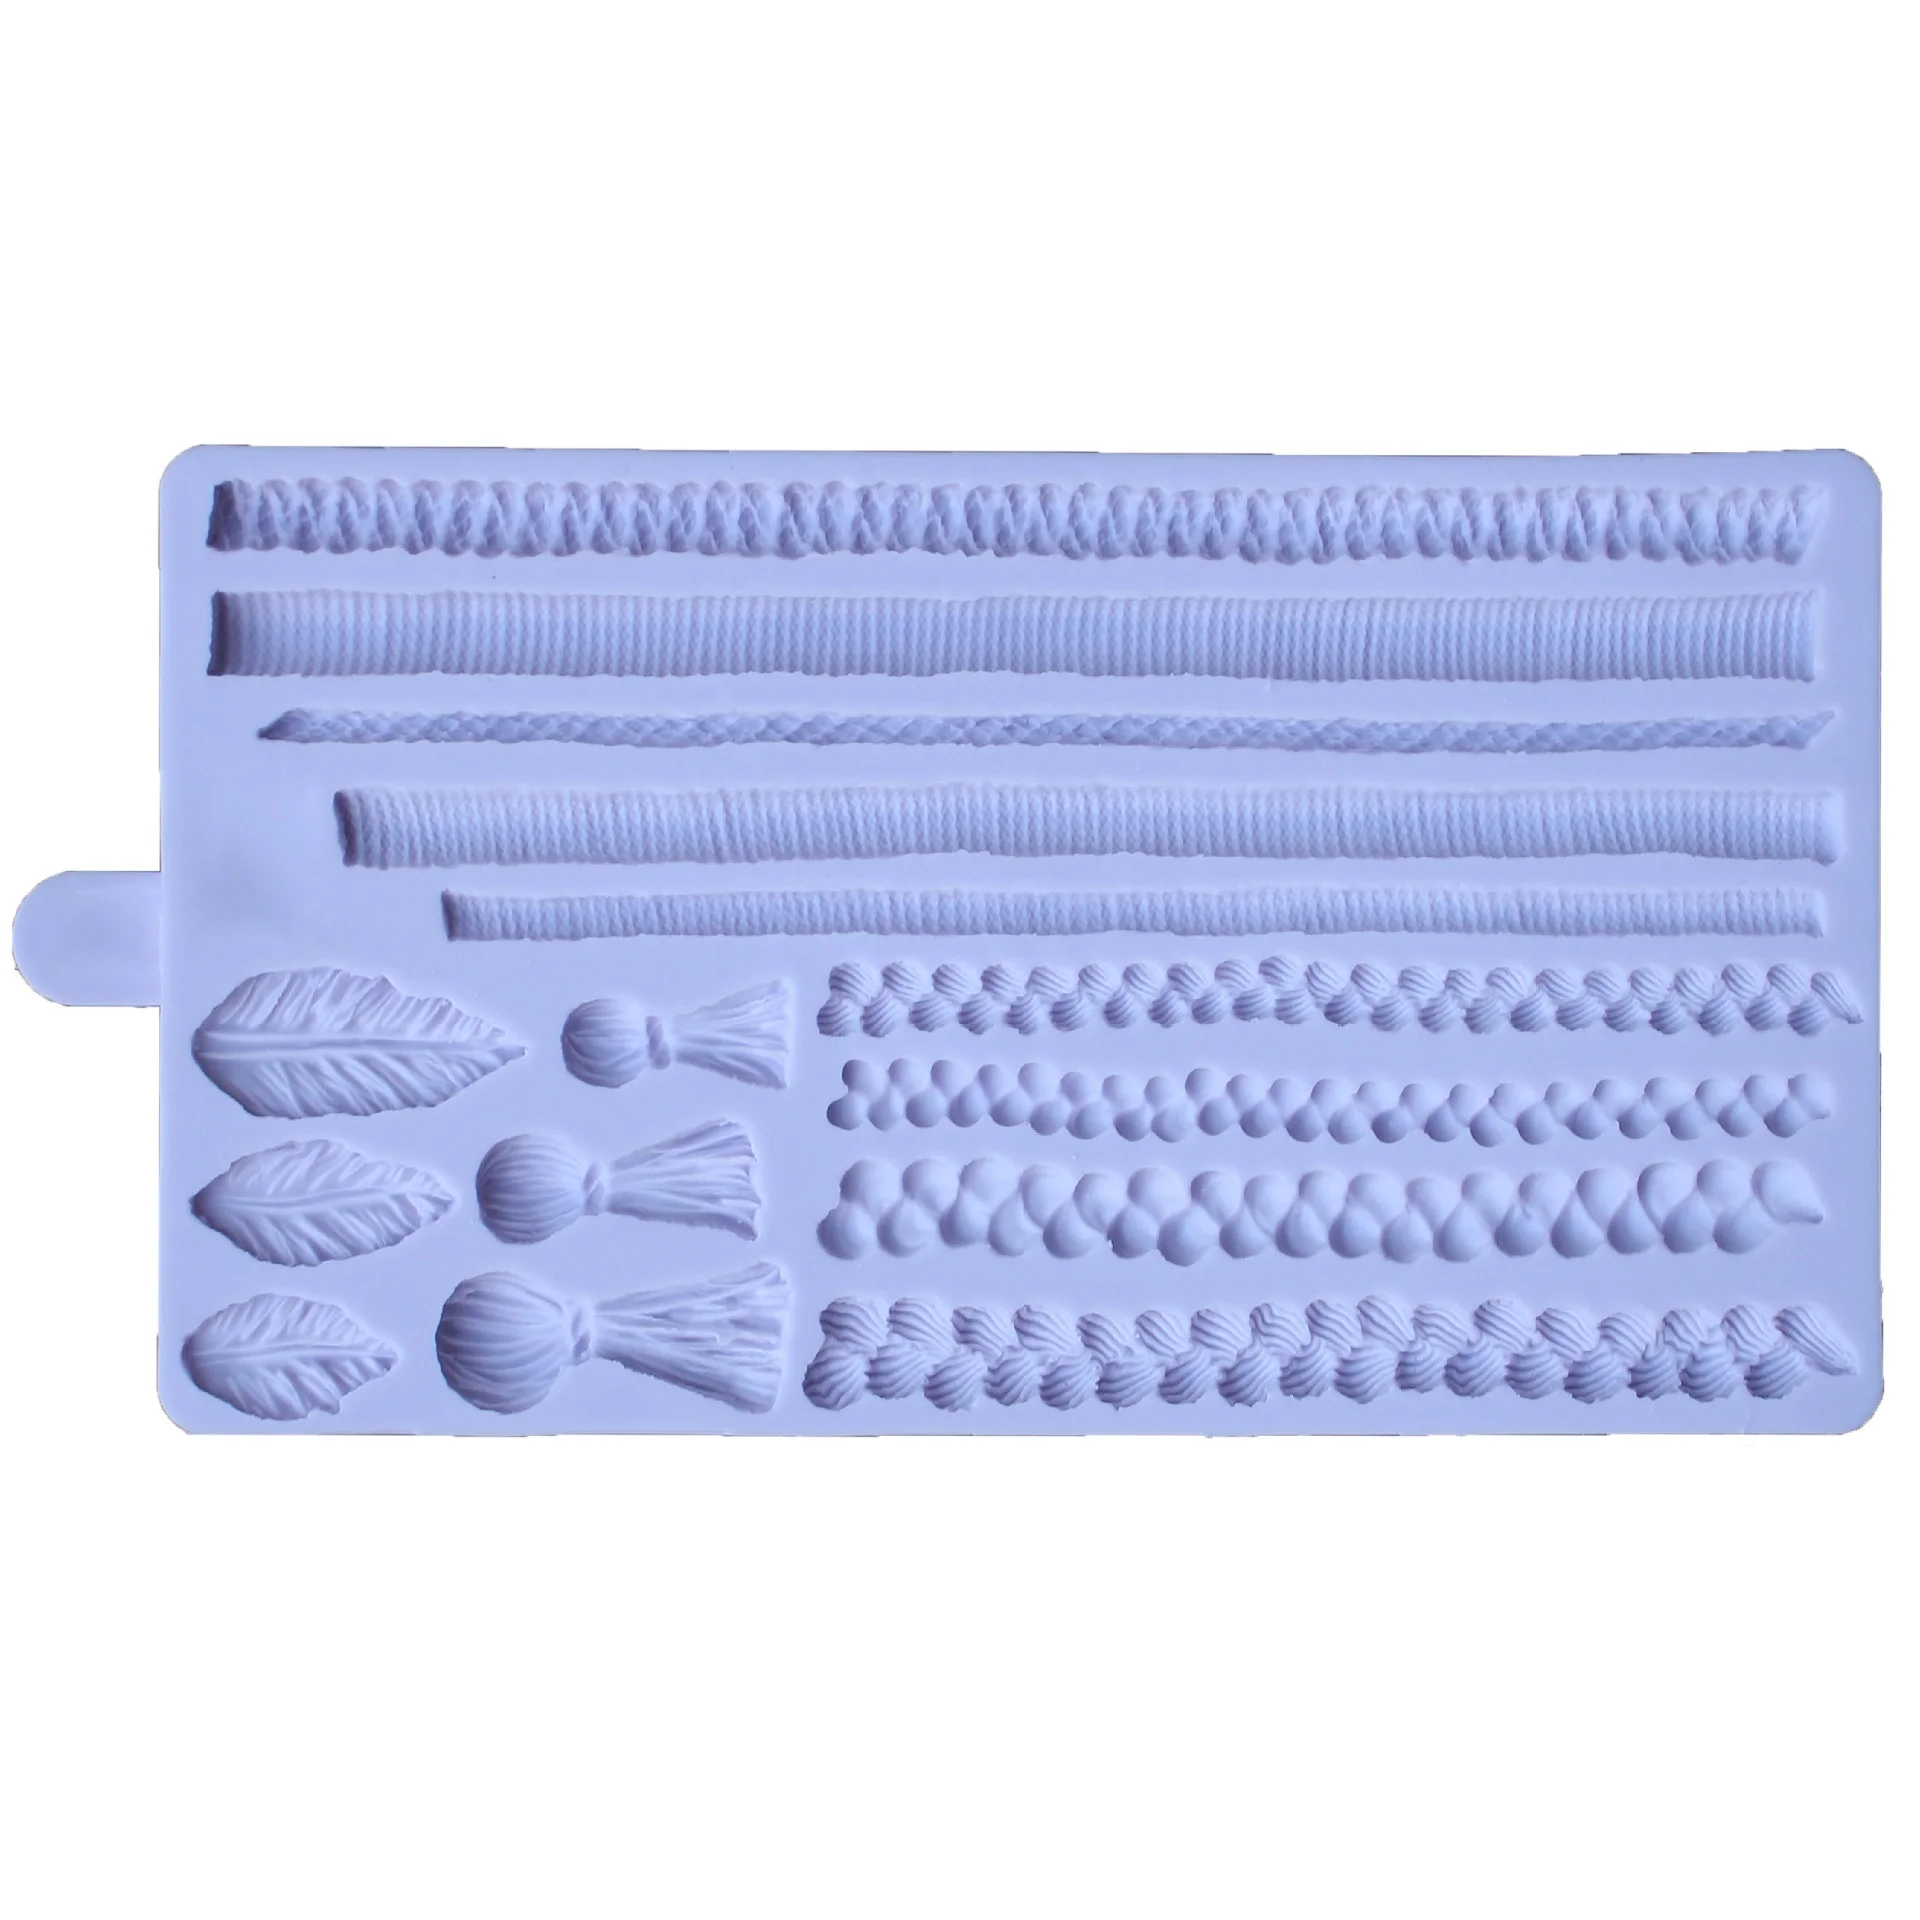 Long Rope Knots Fondant Silicone Mat Reusable Plastic Sugar Craft Candy Mold Wedding Party DIY Decorative Wooden Cake Tools Set